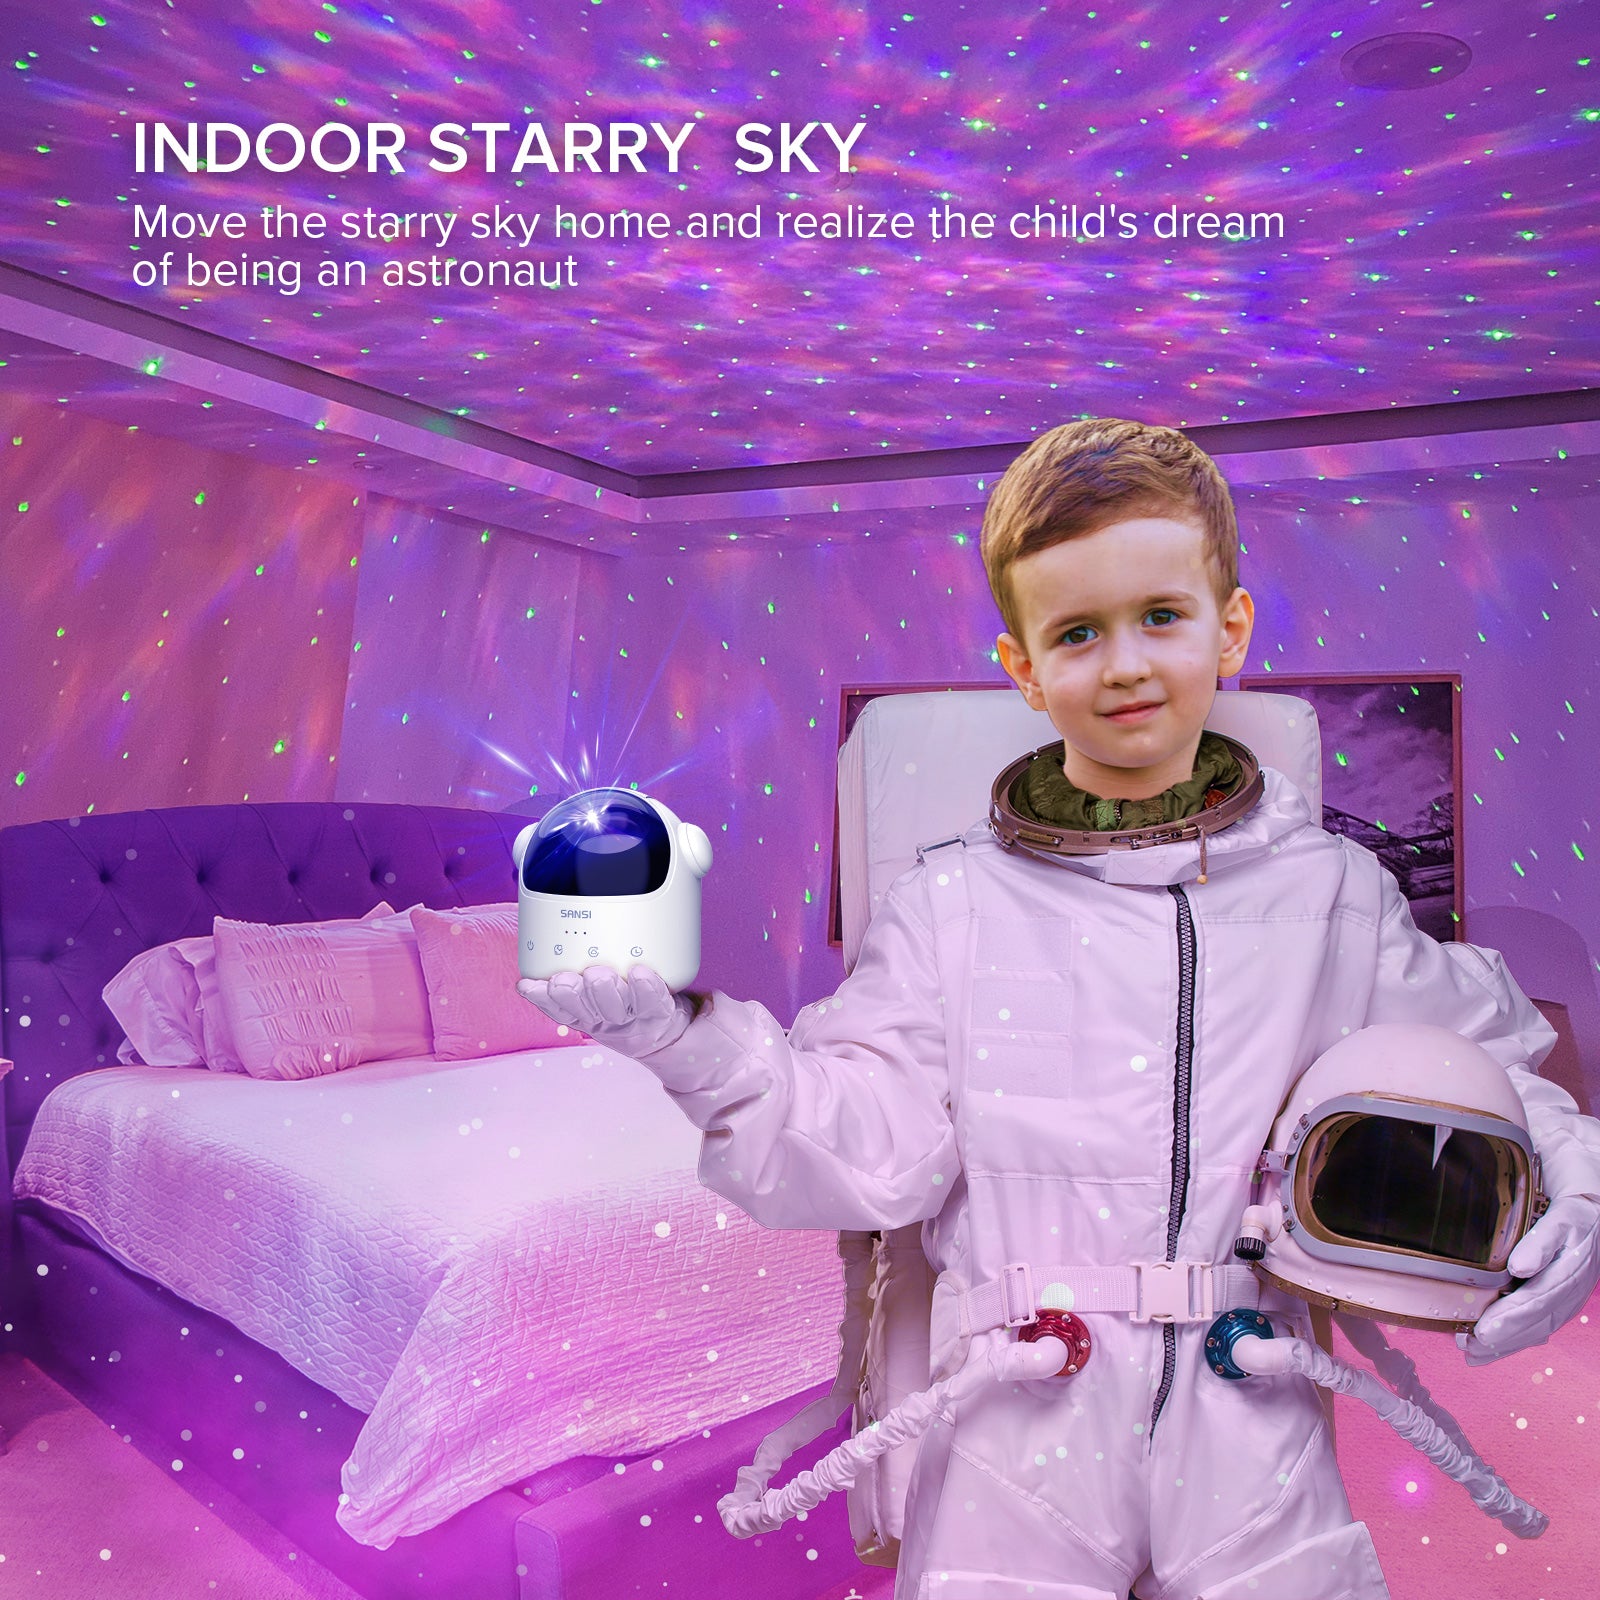 Galaxy Projector: How To Turn Your Home Into A Space Exploration Dream